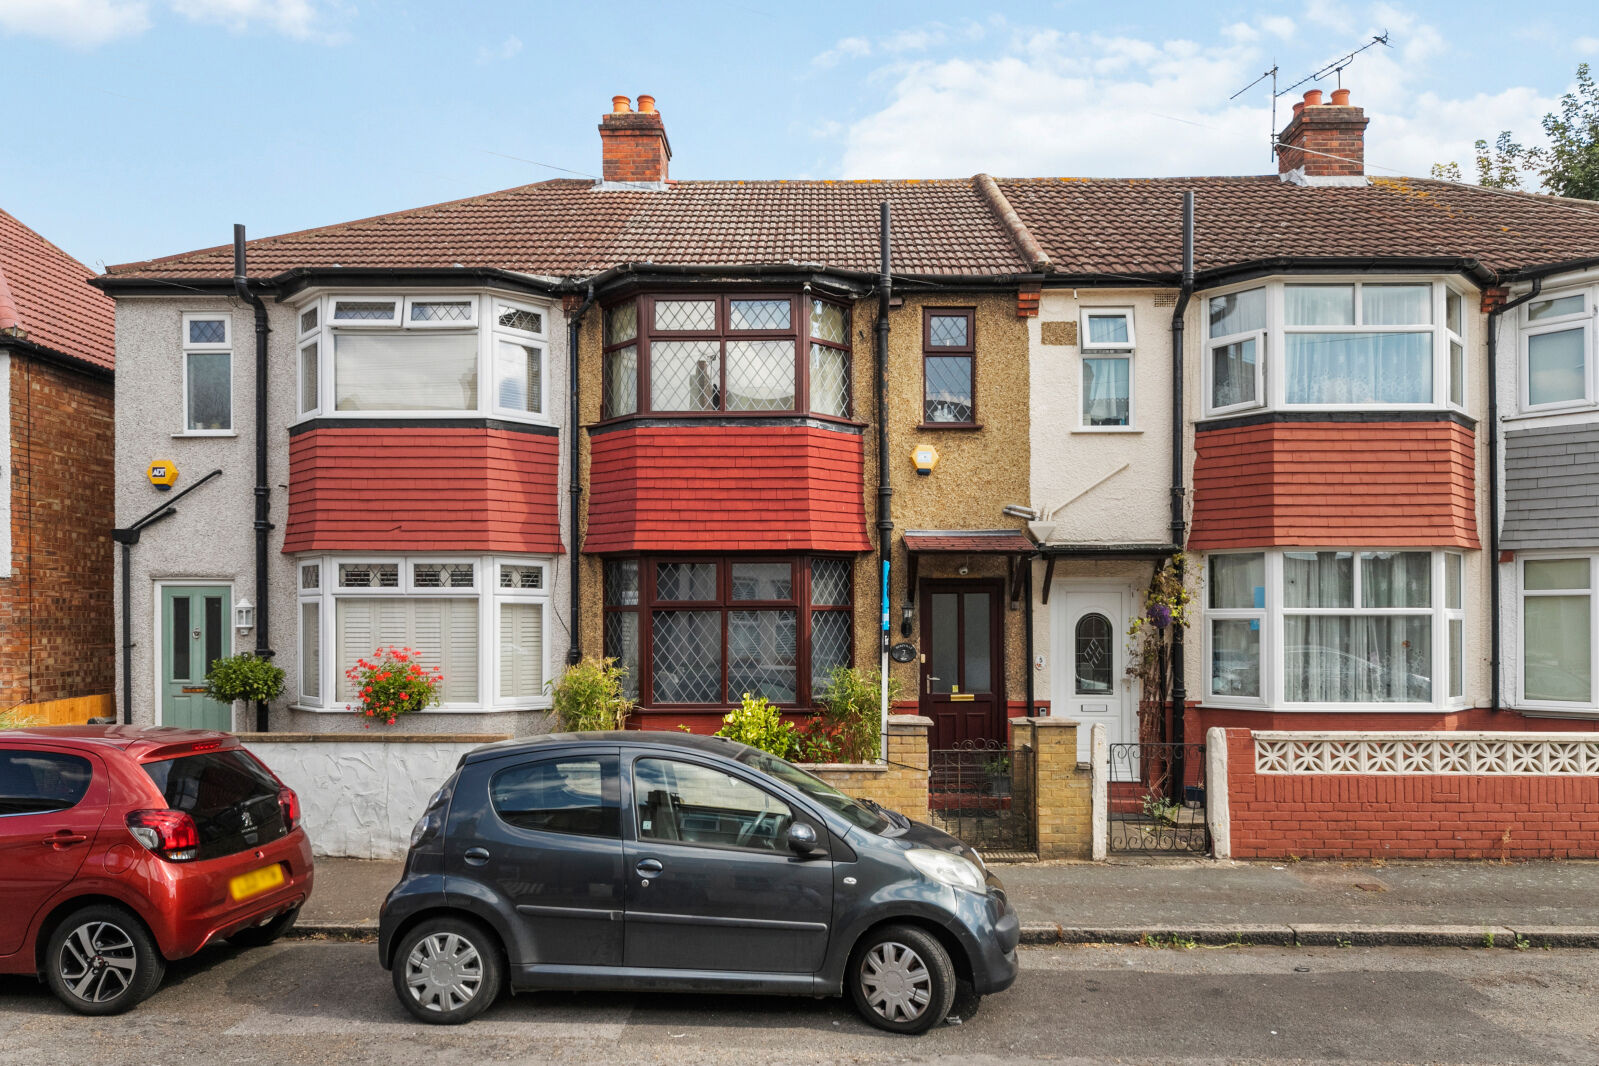 3 bedroom mid terraced house for sale York Street, Mitcham, CR4, main image